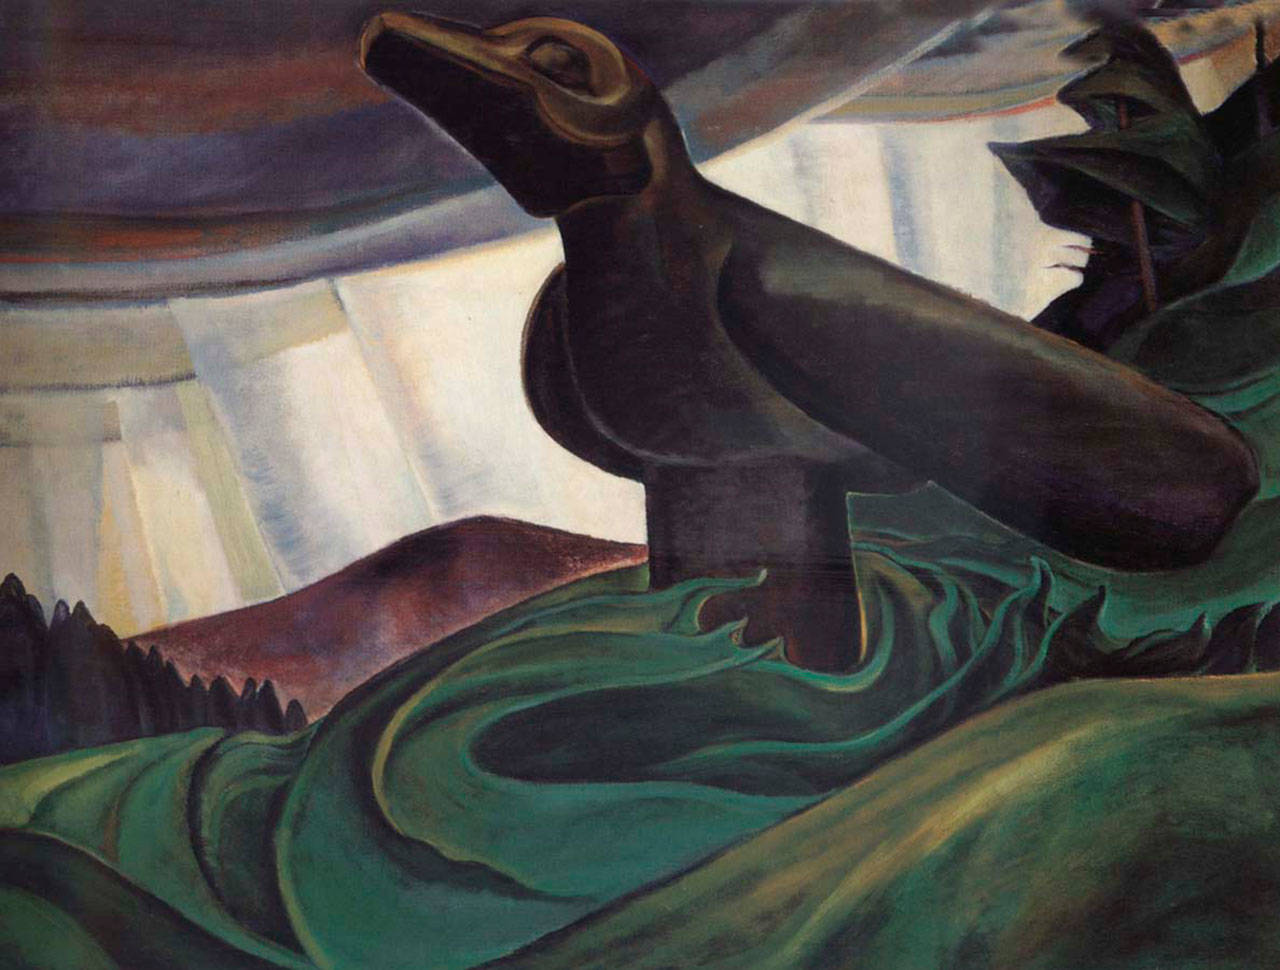 Emily Carr’s art will be on display in an exhibit titled “Picturing the Giants: The Changing Landscapes of Emily Carr” in Victoria, B.C., on Aug. 3 at the Art Gallery of Greater Victoria.